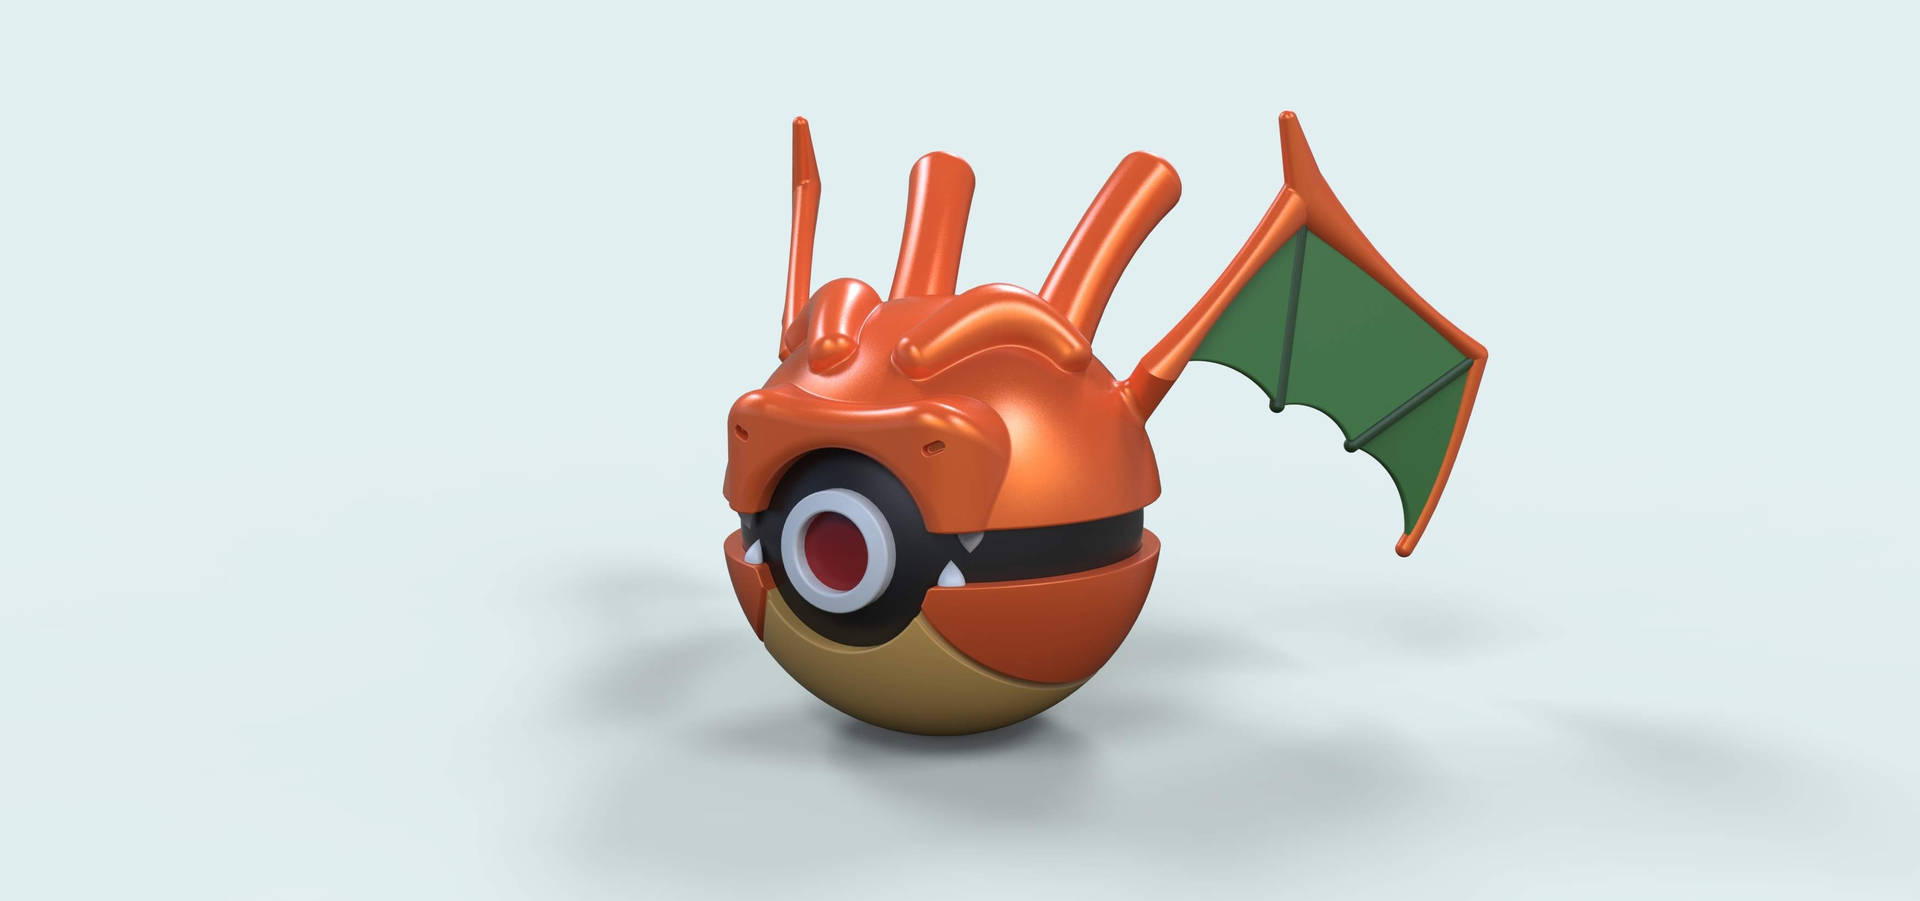 Catch A Legendary Dragonite With This Pokeball! Background